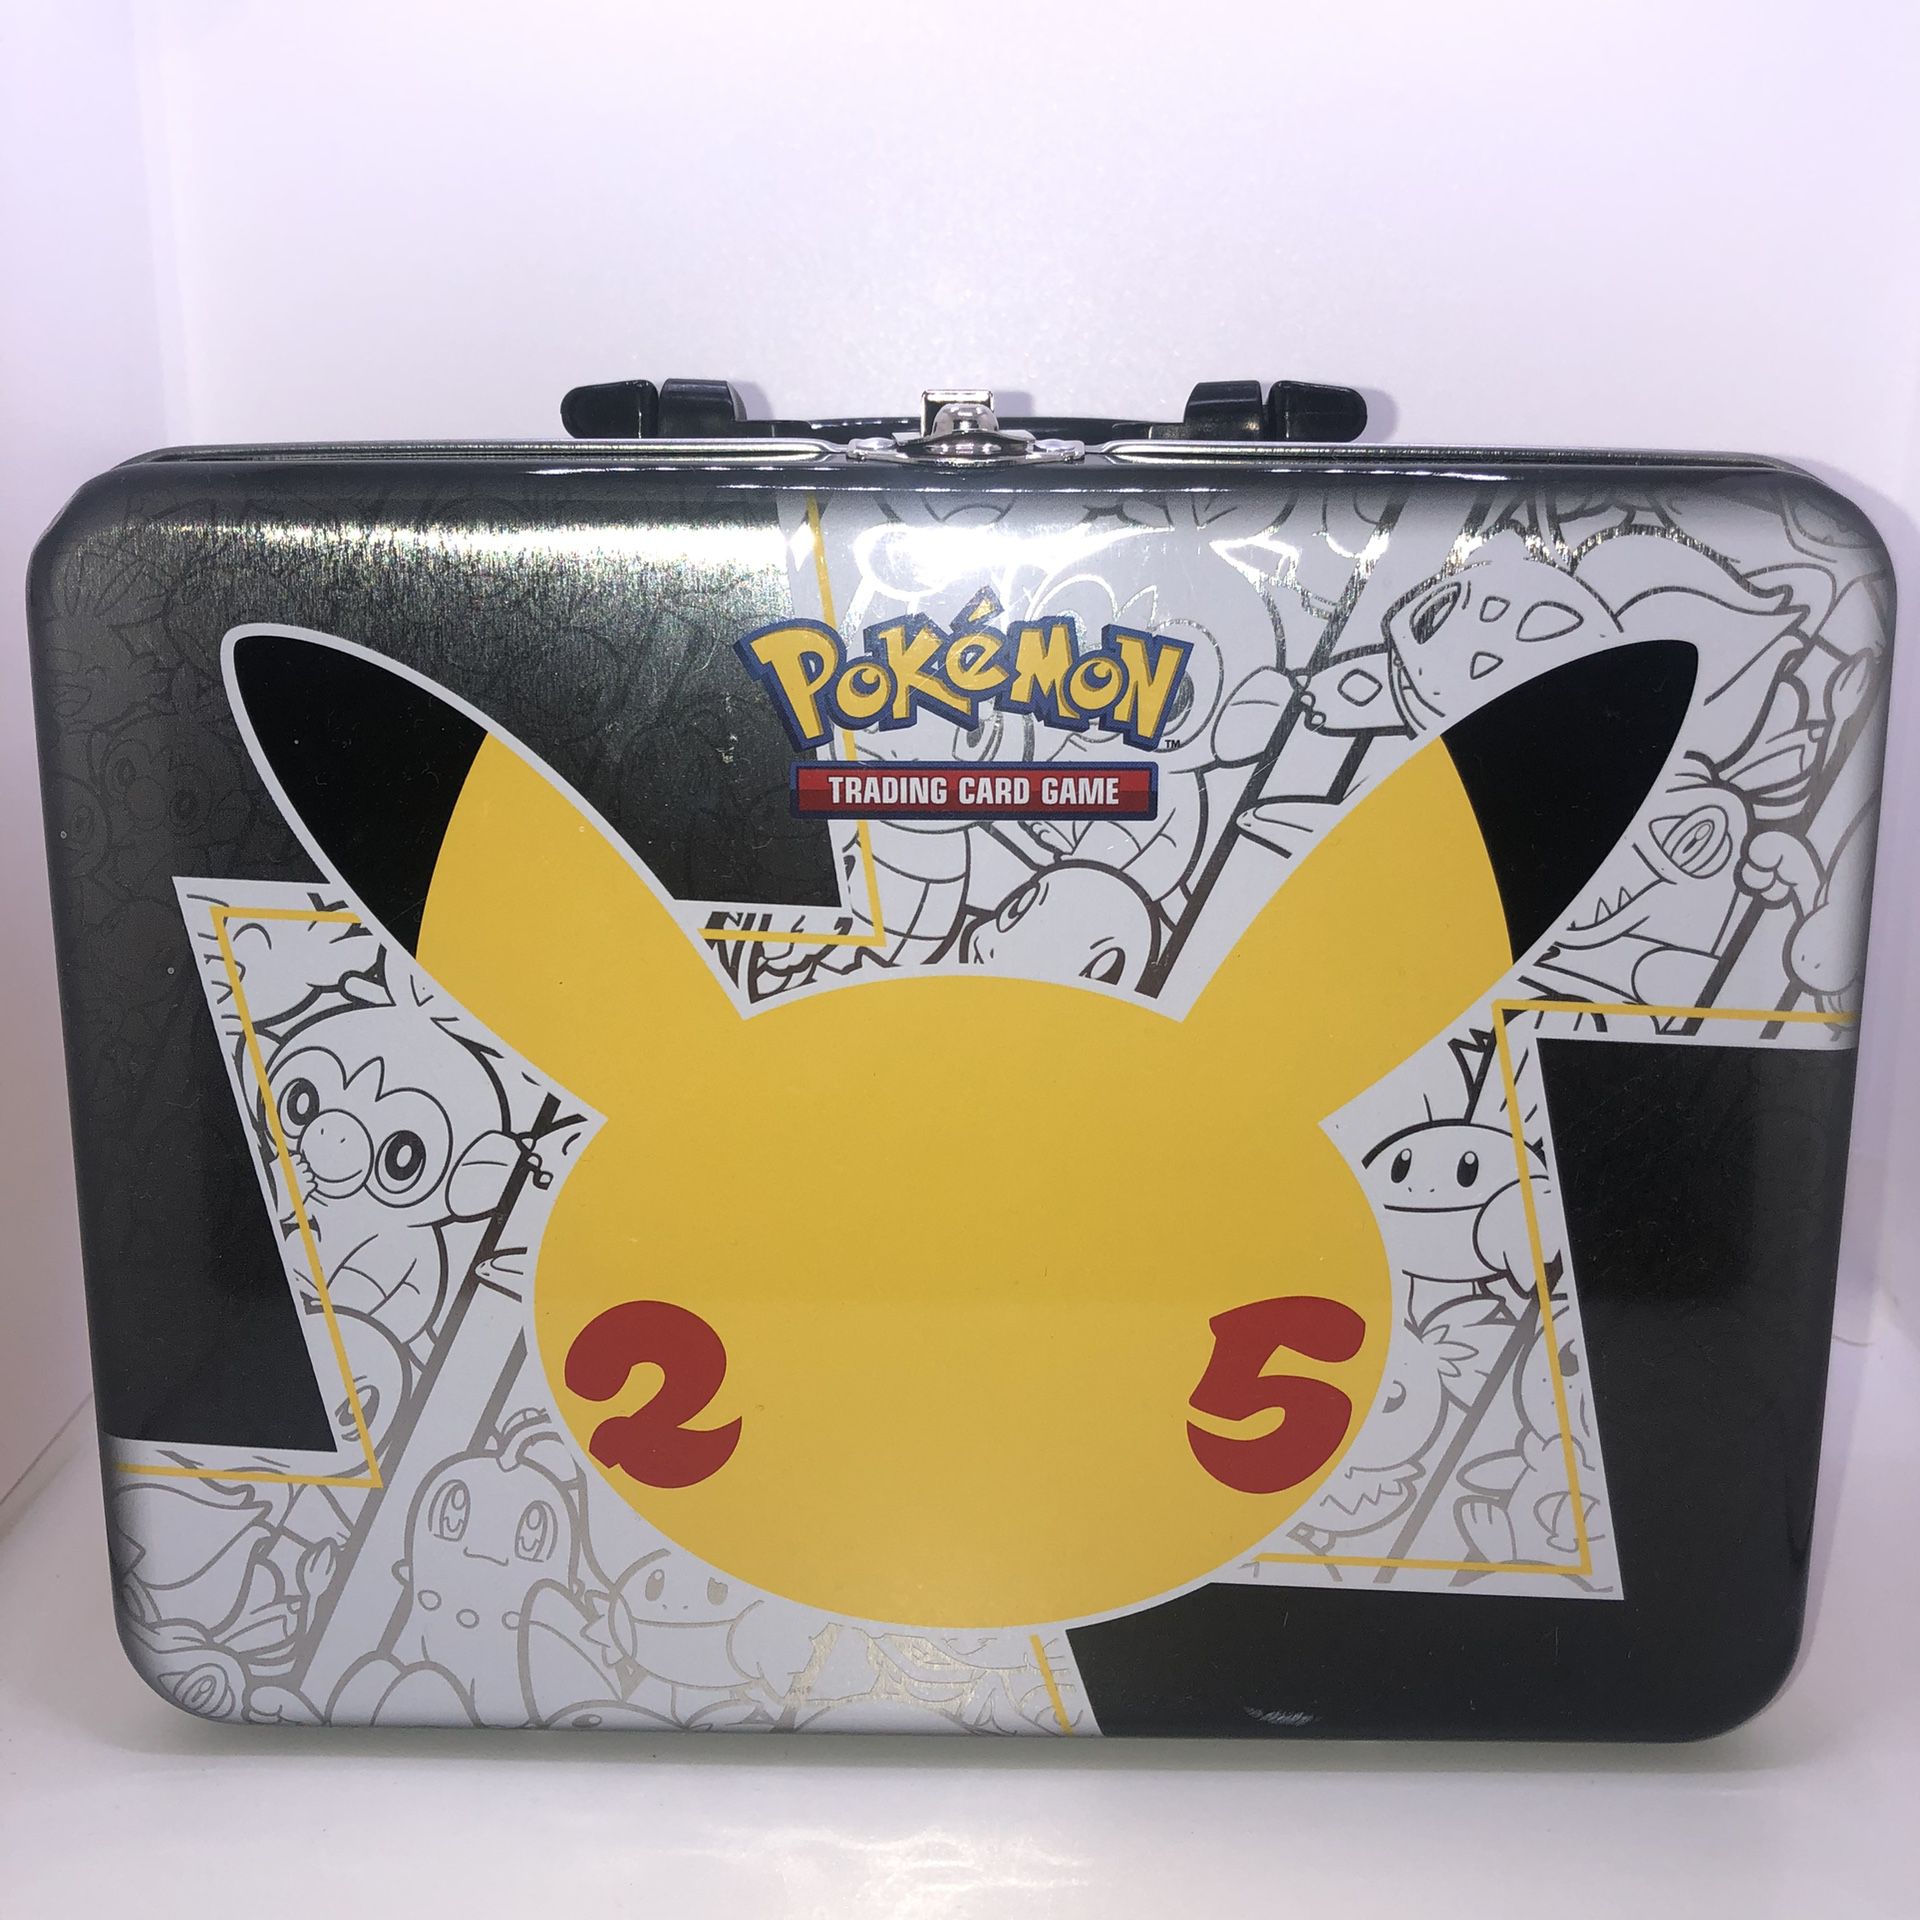 Pokemon Trading Card Game 25th Anniversary Tin Lunch Box w/ 4 Sticker Pages